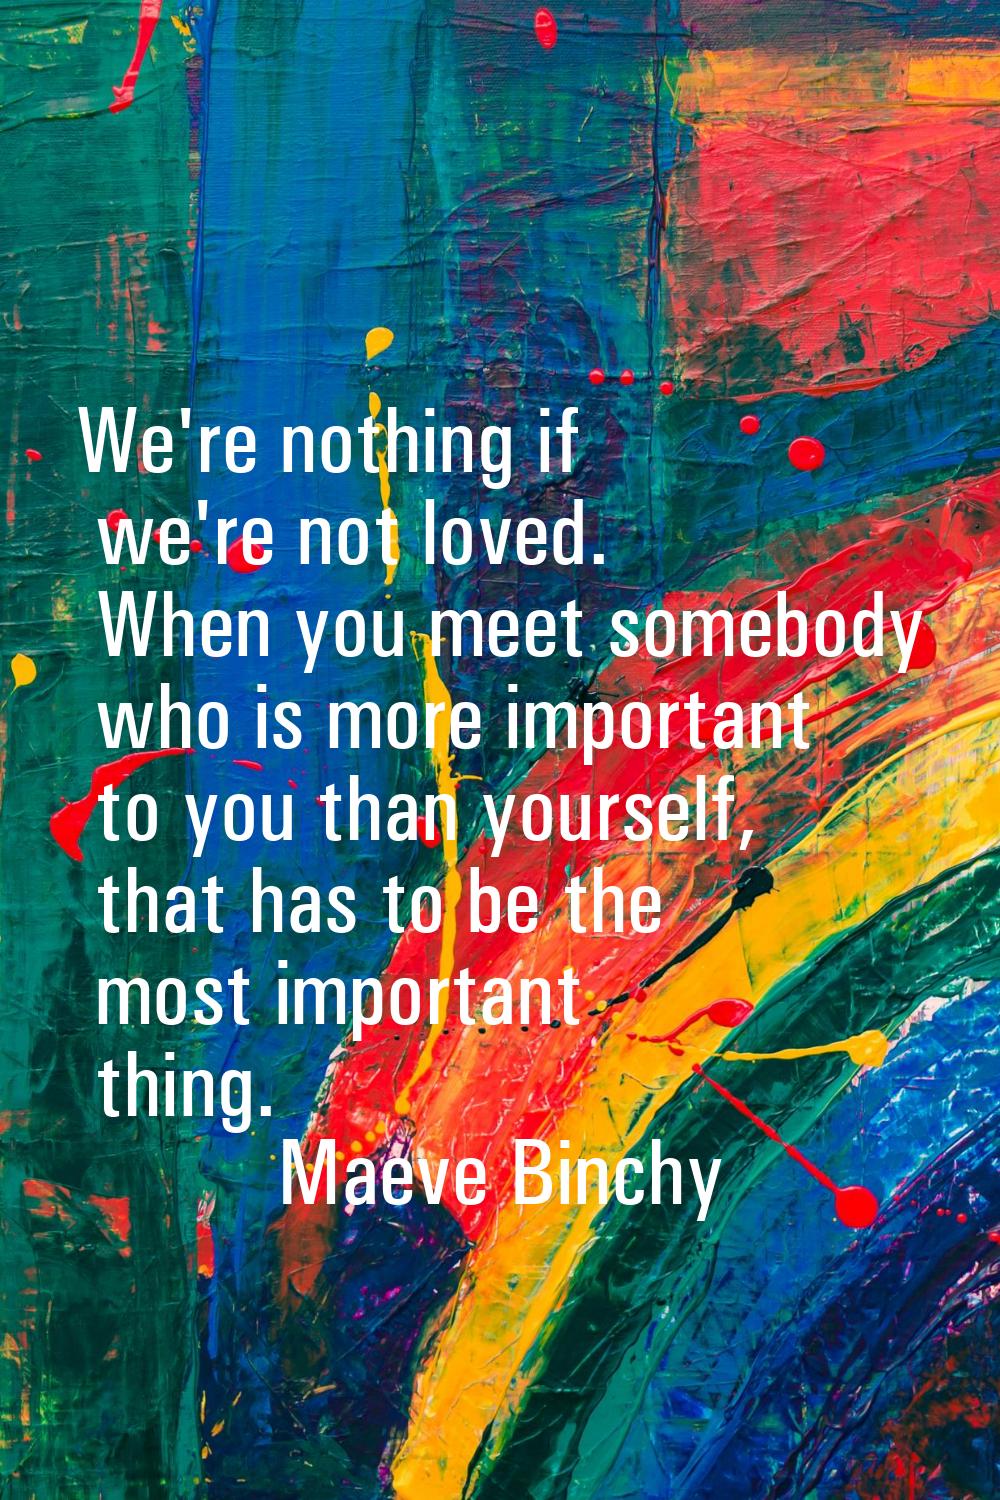 We're nothing if we're not loved. When you meet somebody who is more important to you than yourself